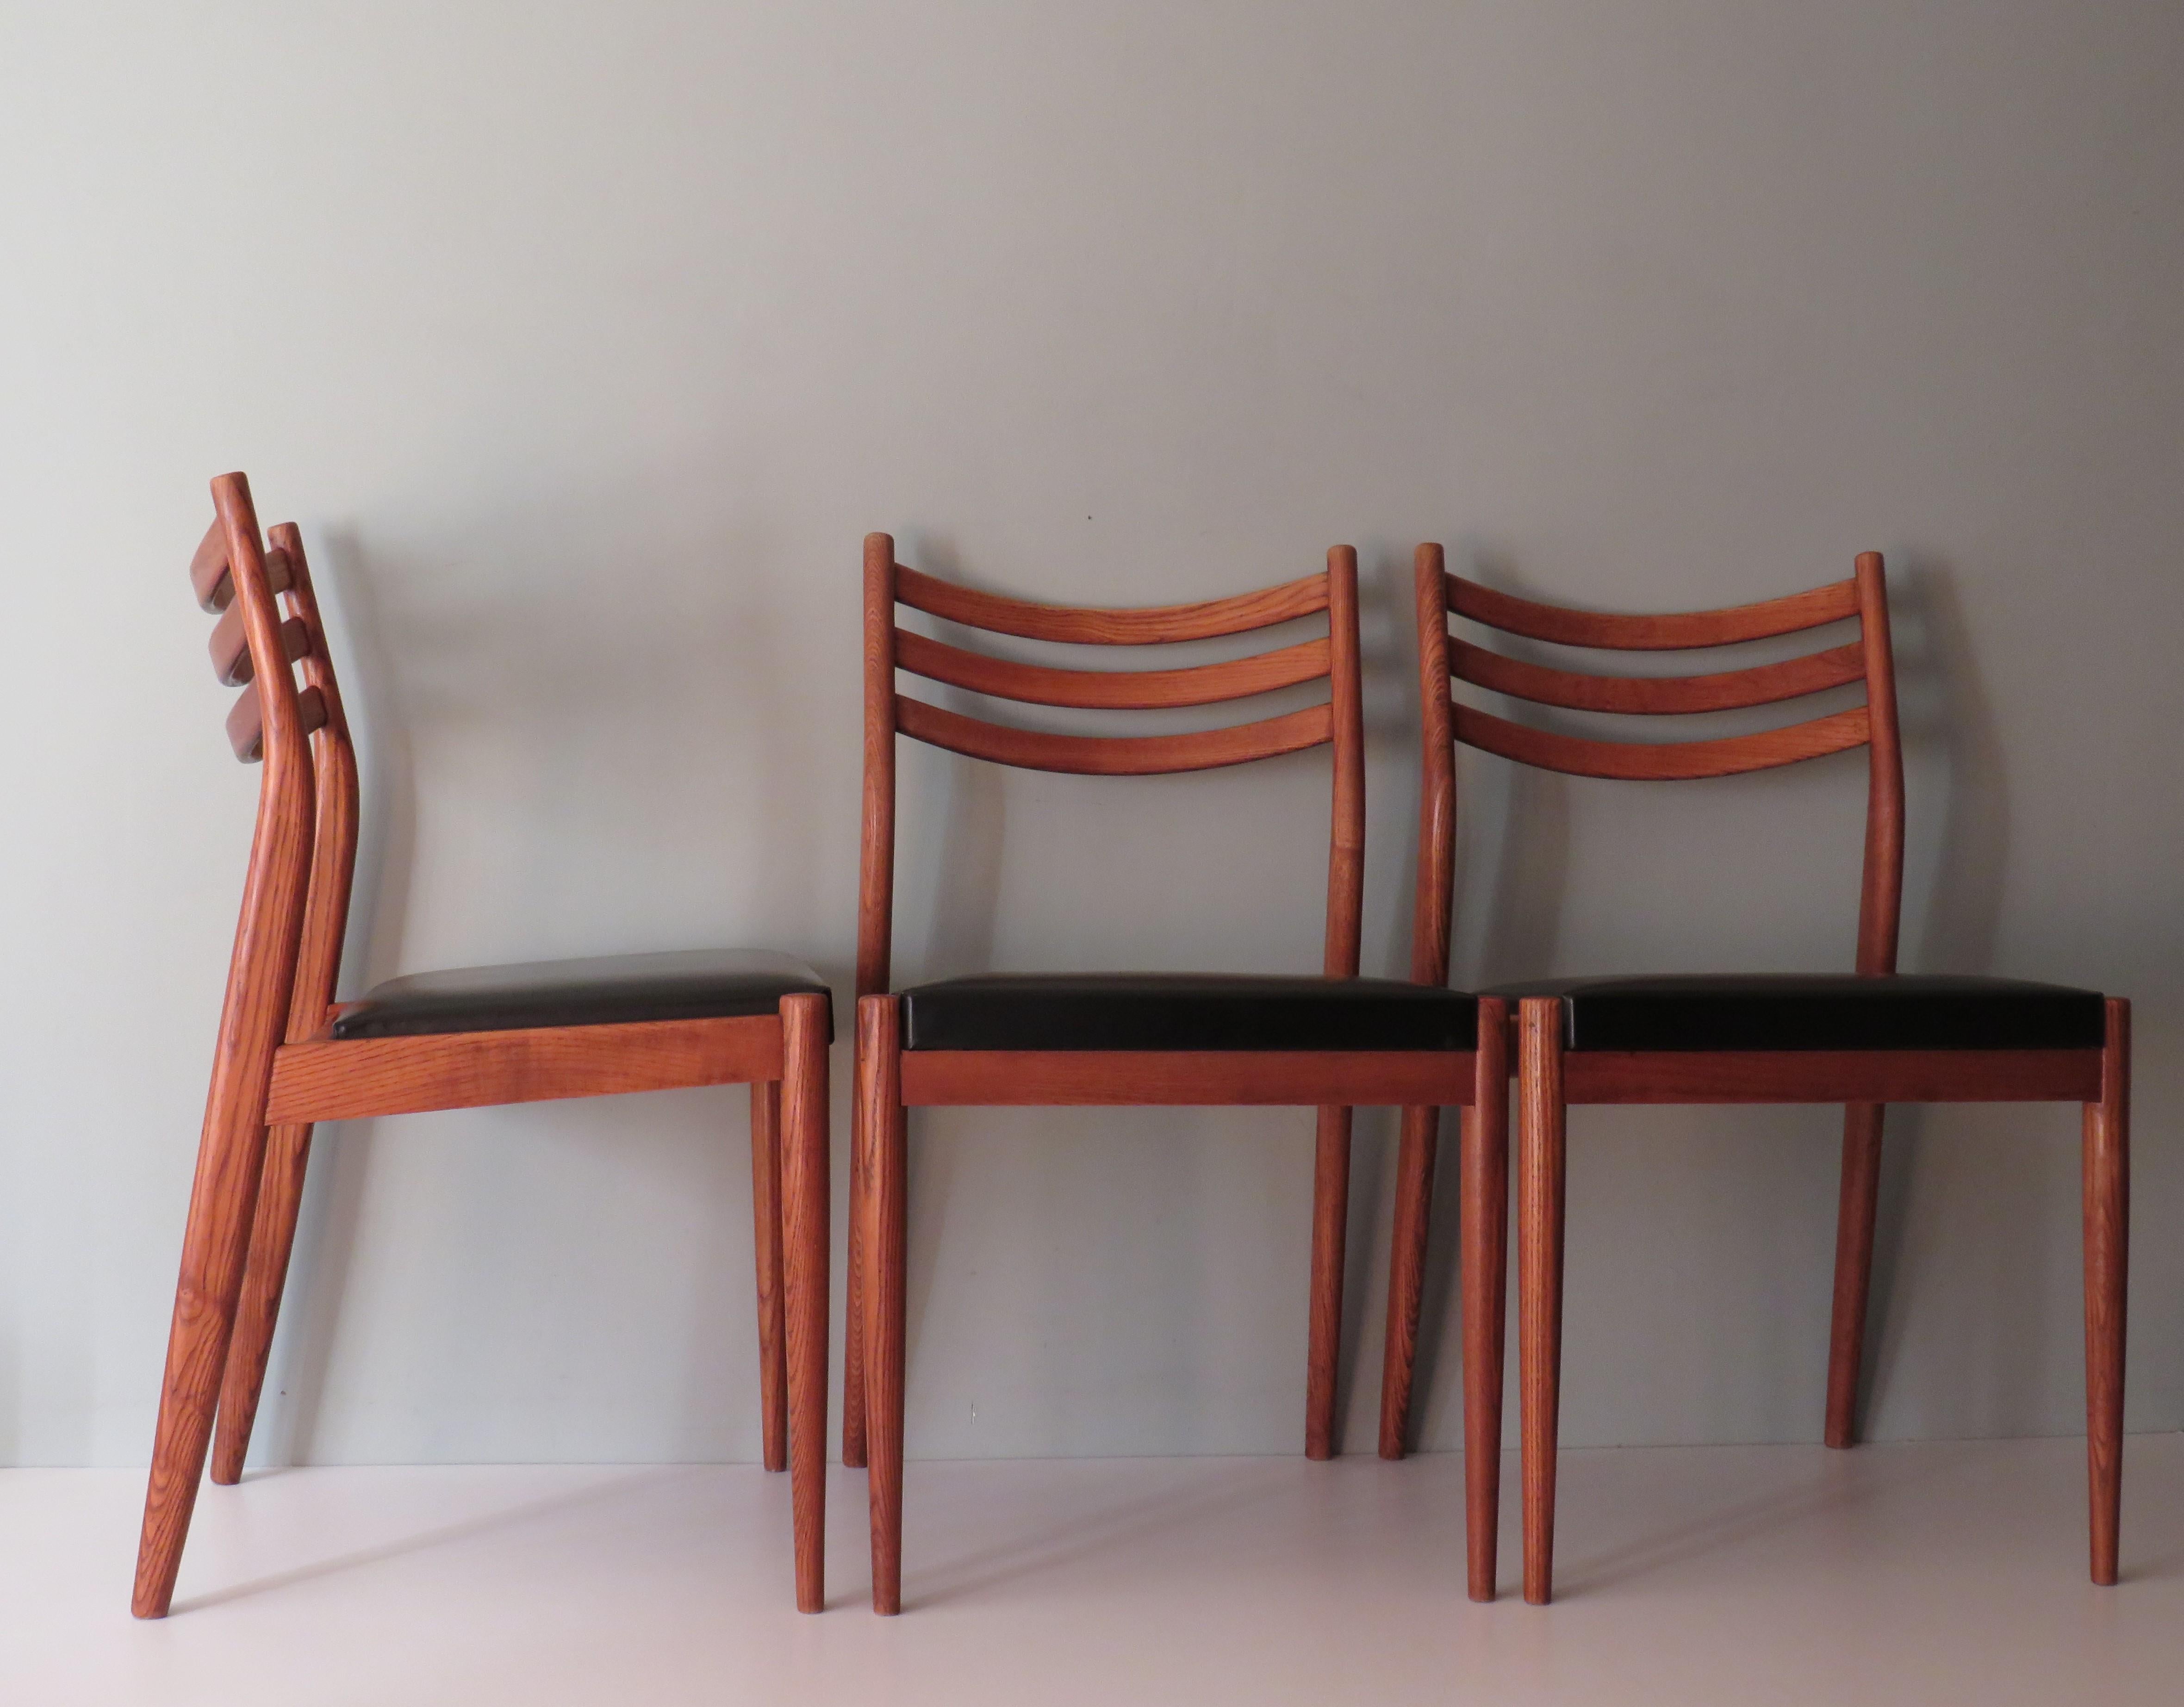 Set of 3 Teak Dining Room Chairs, Danish Design 1960-1970 In Good Condition For Sale In Herentals, BE